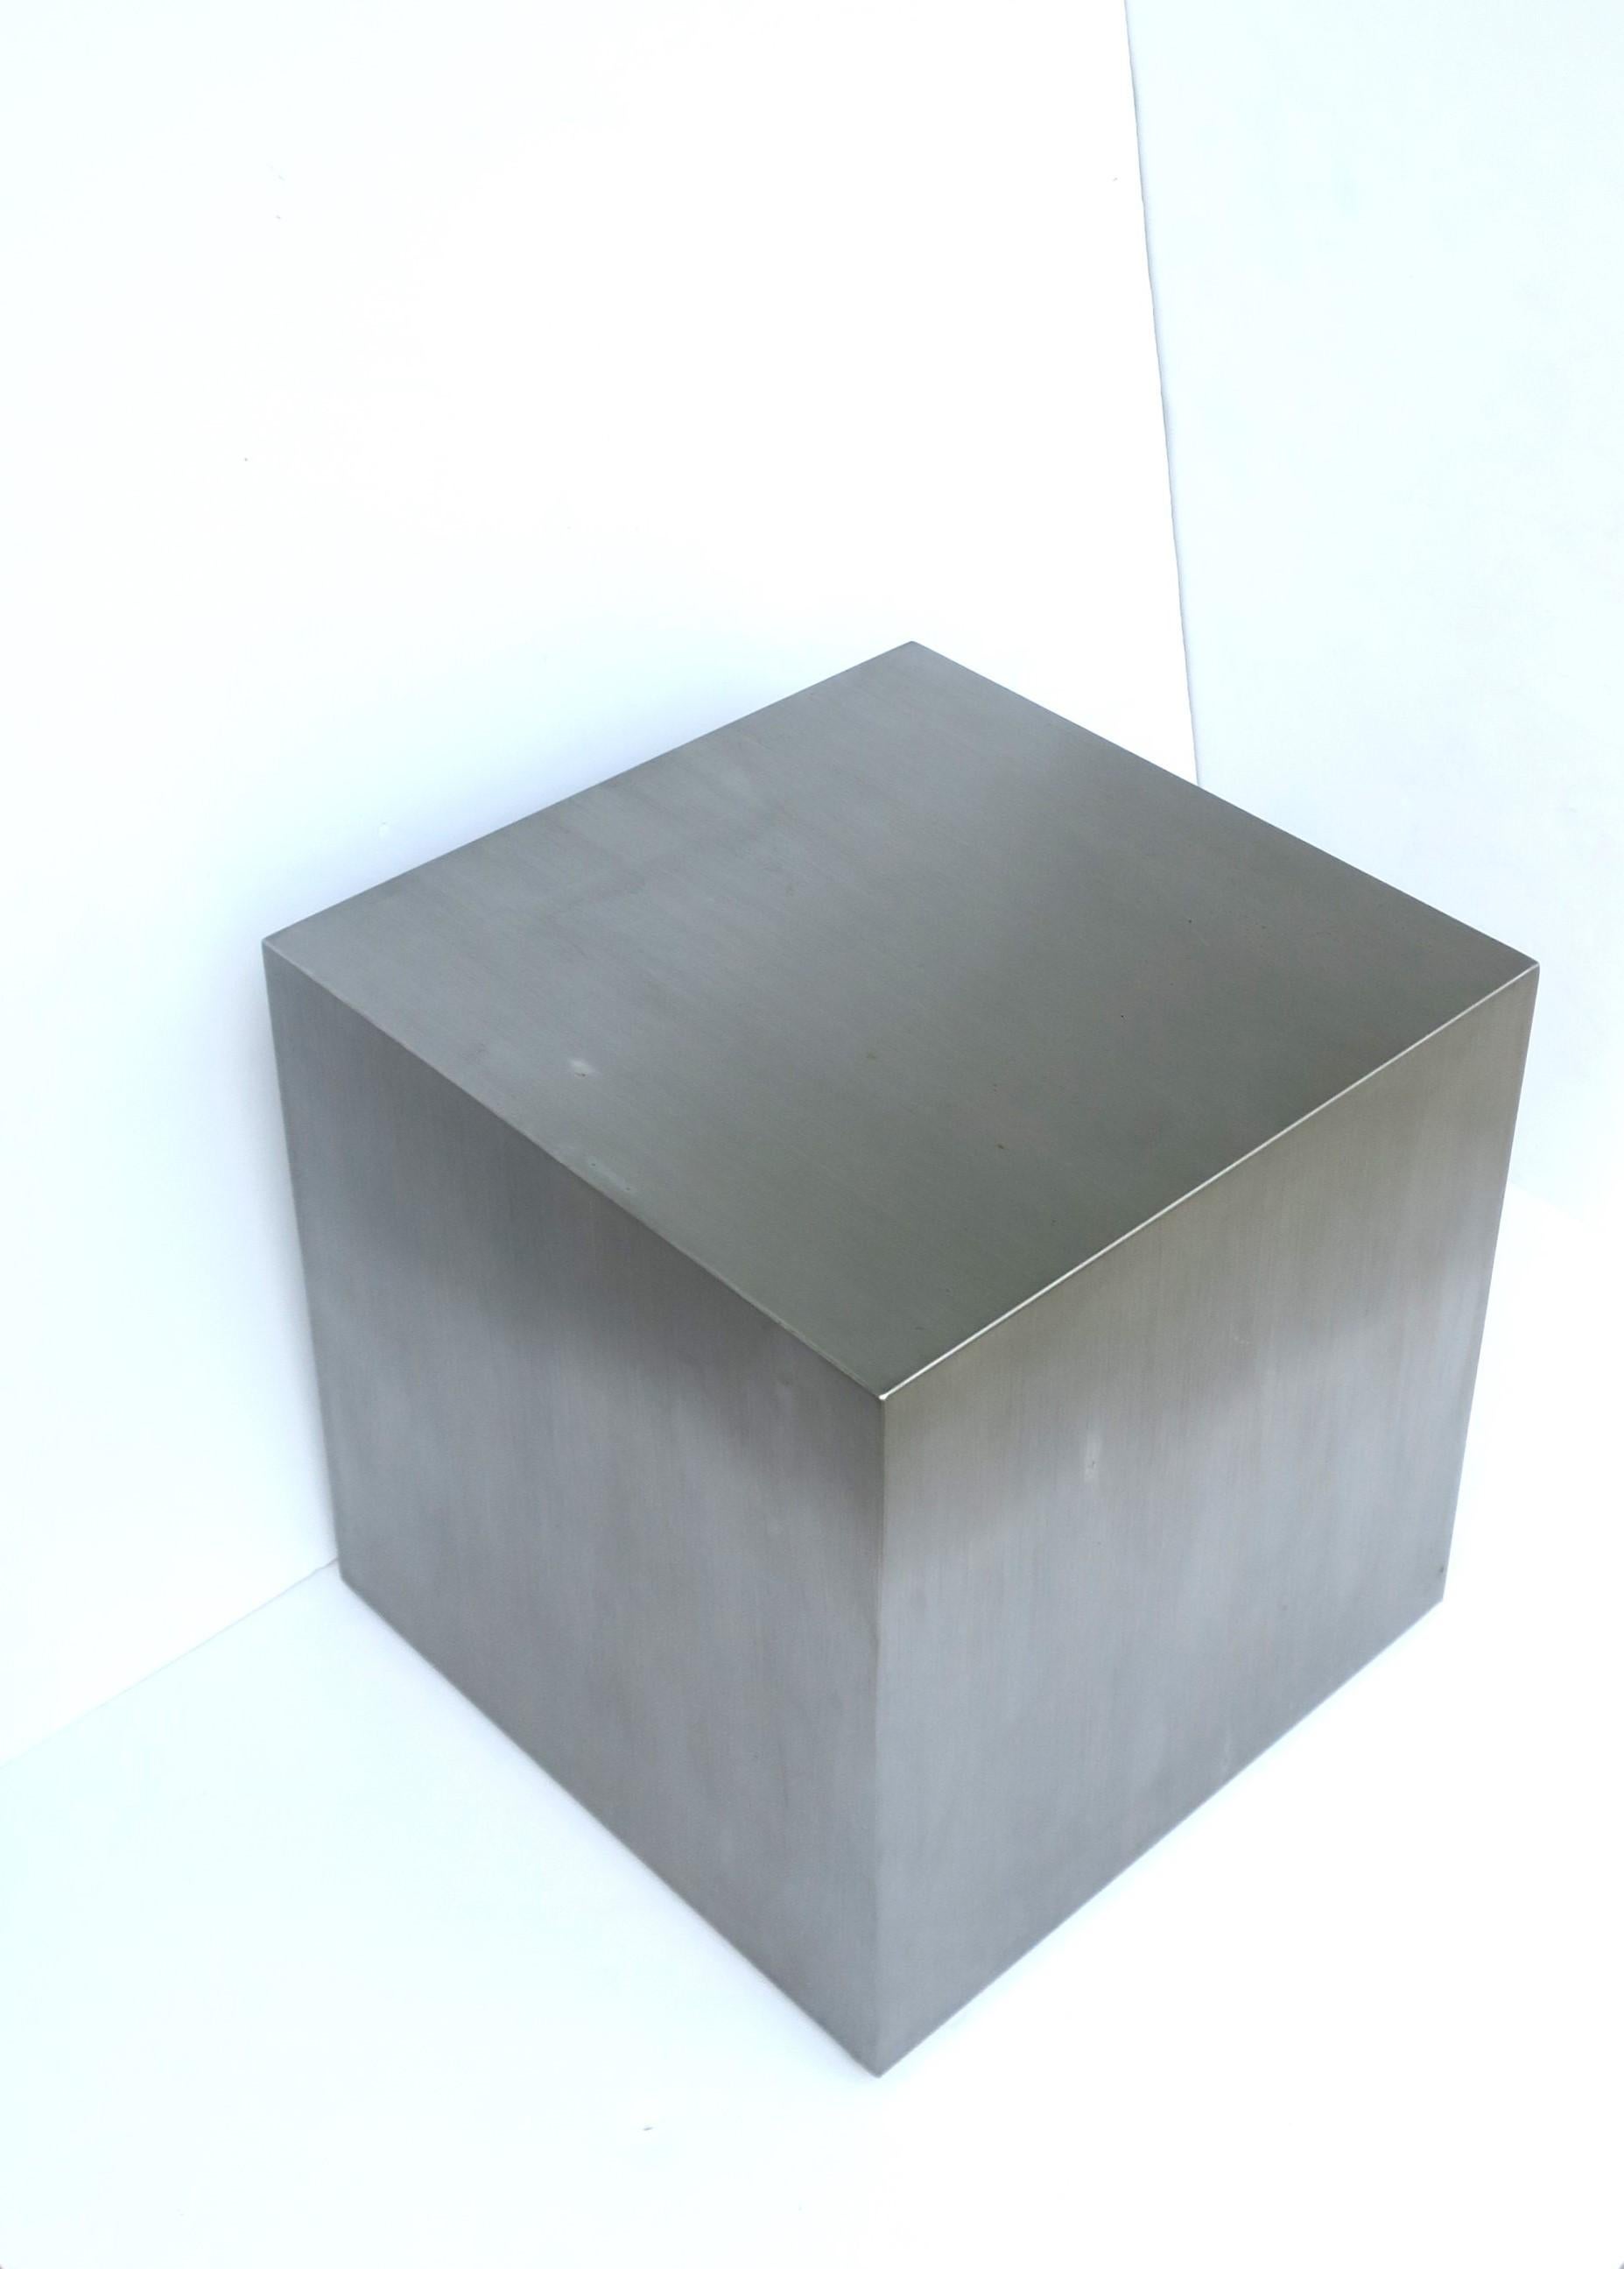 A brushed steel cube pedestal end table in the Minimalist style, circa late-20th century. Table is a brushed silver steel in a square cube form. Great as an end table, side/cocktail table, or to hold/display sculpture, books, etc. Dimensions: 15.69